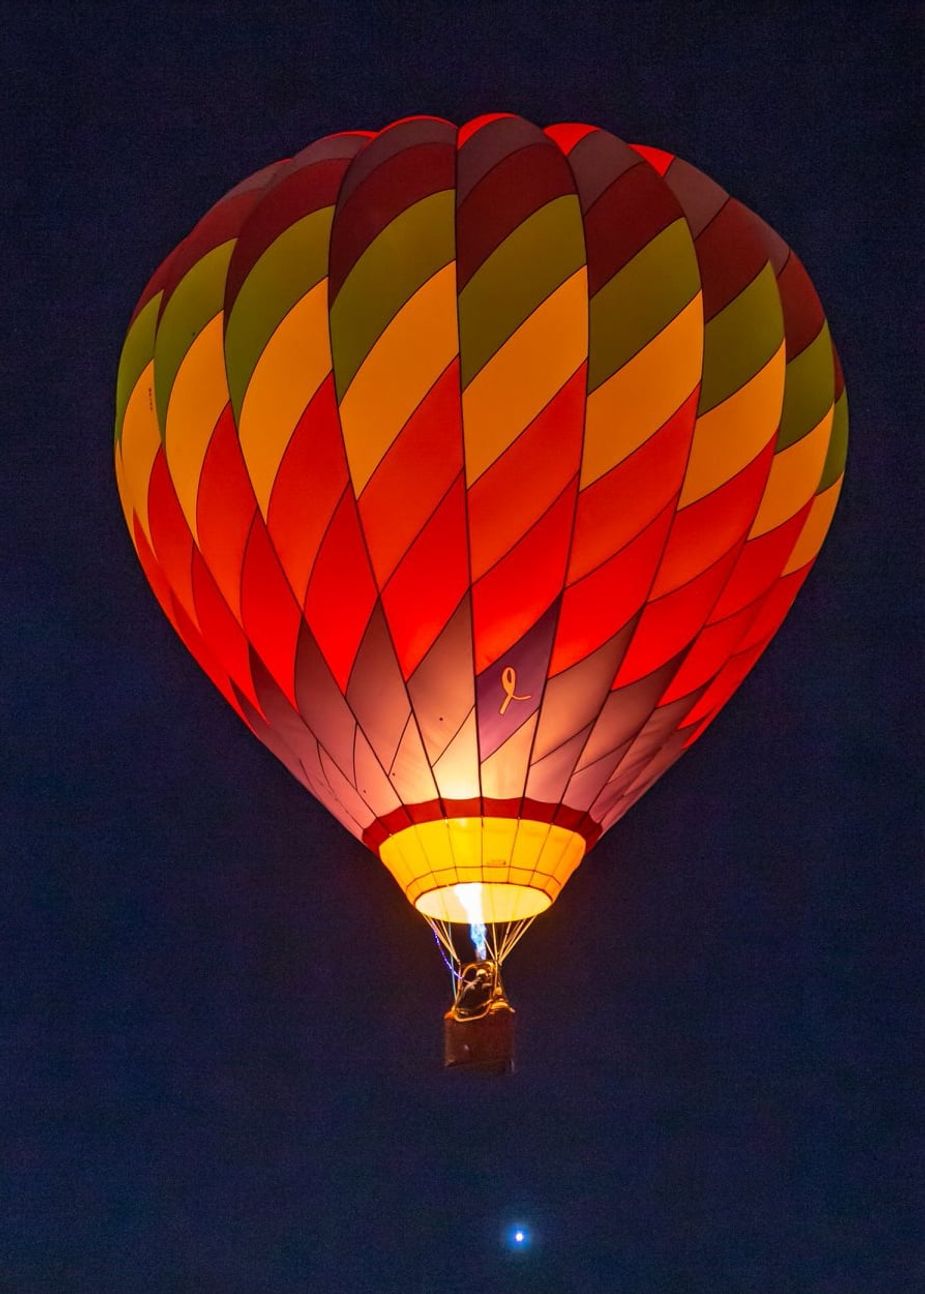 Pilot Michael Scott shows off his skills at the Oklahoma Festival of Ballooning in Muskogee.